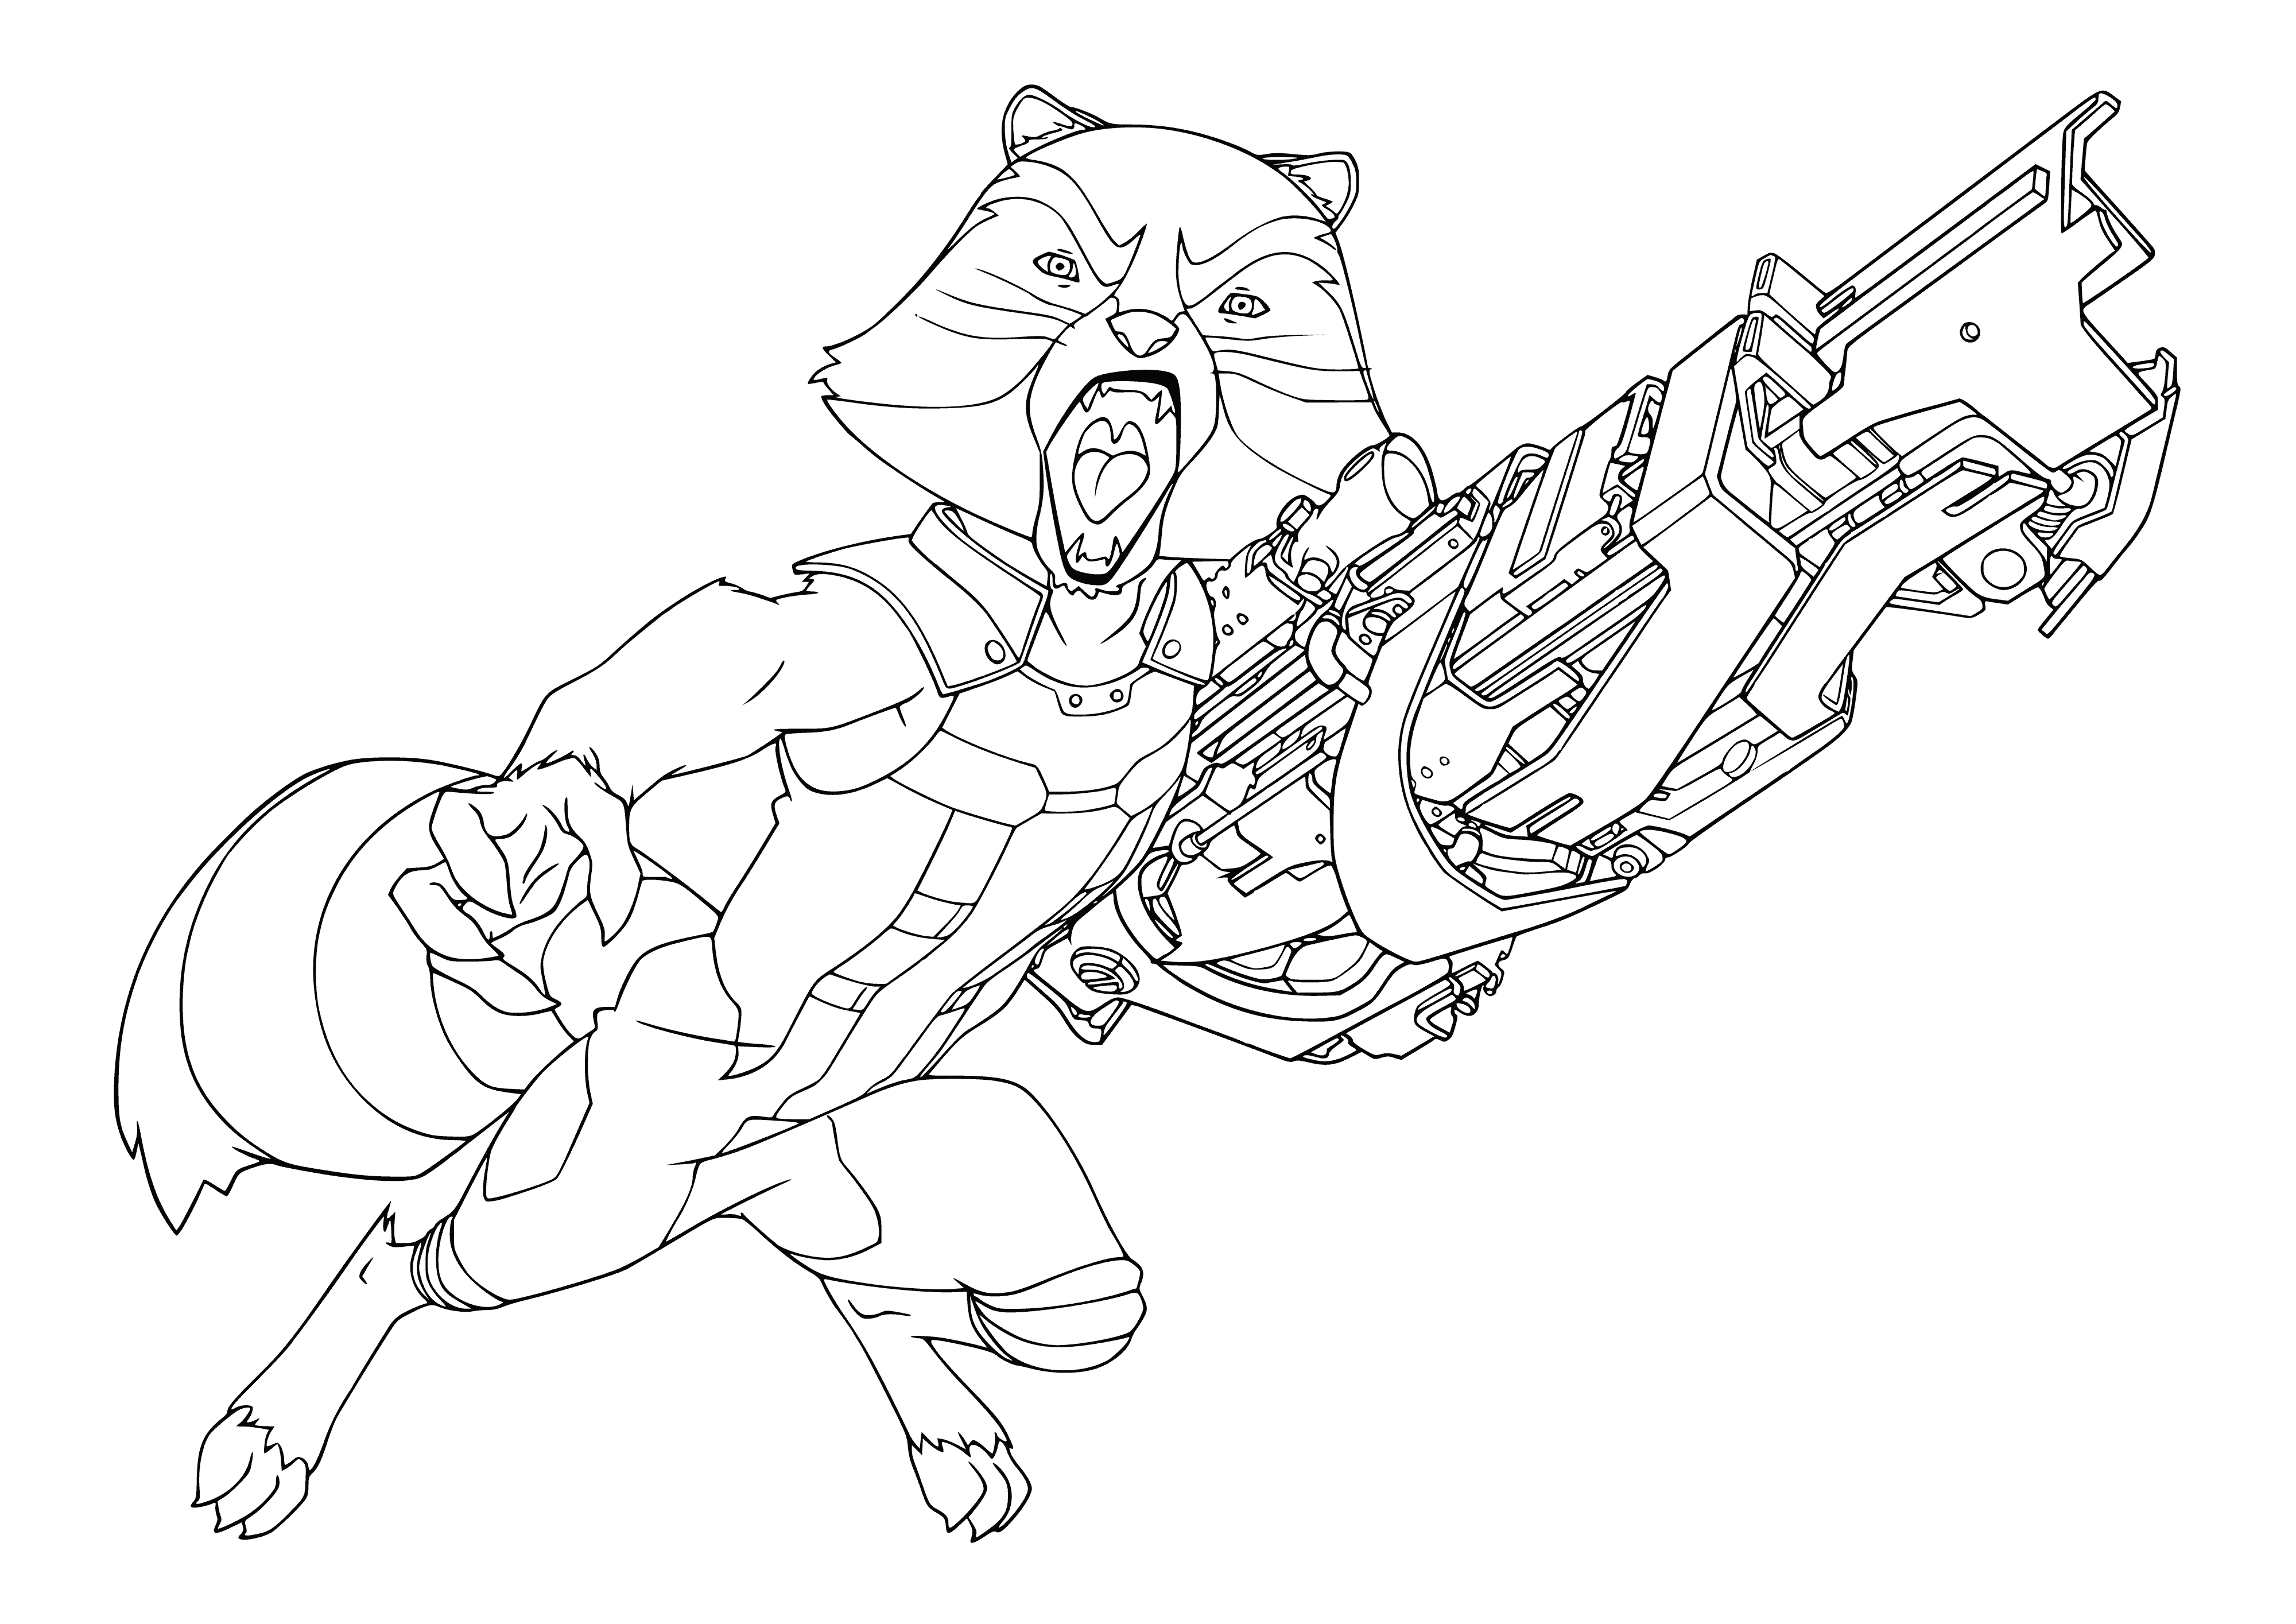 coloring page: Soldiers in red armor and rocket launchers surrounded by blue aliens with guns.